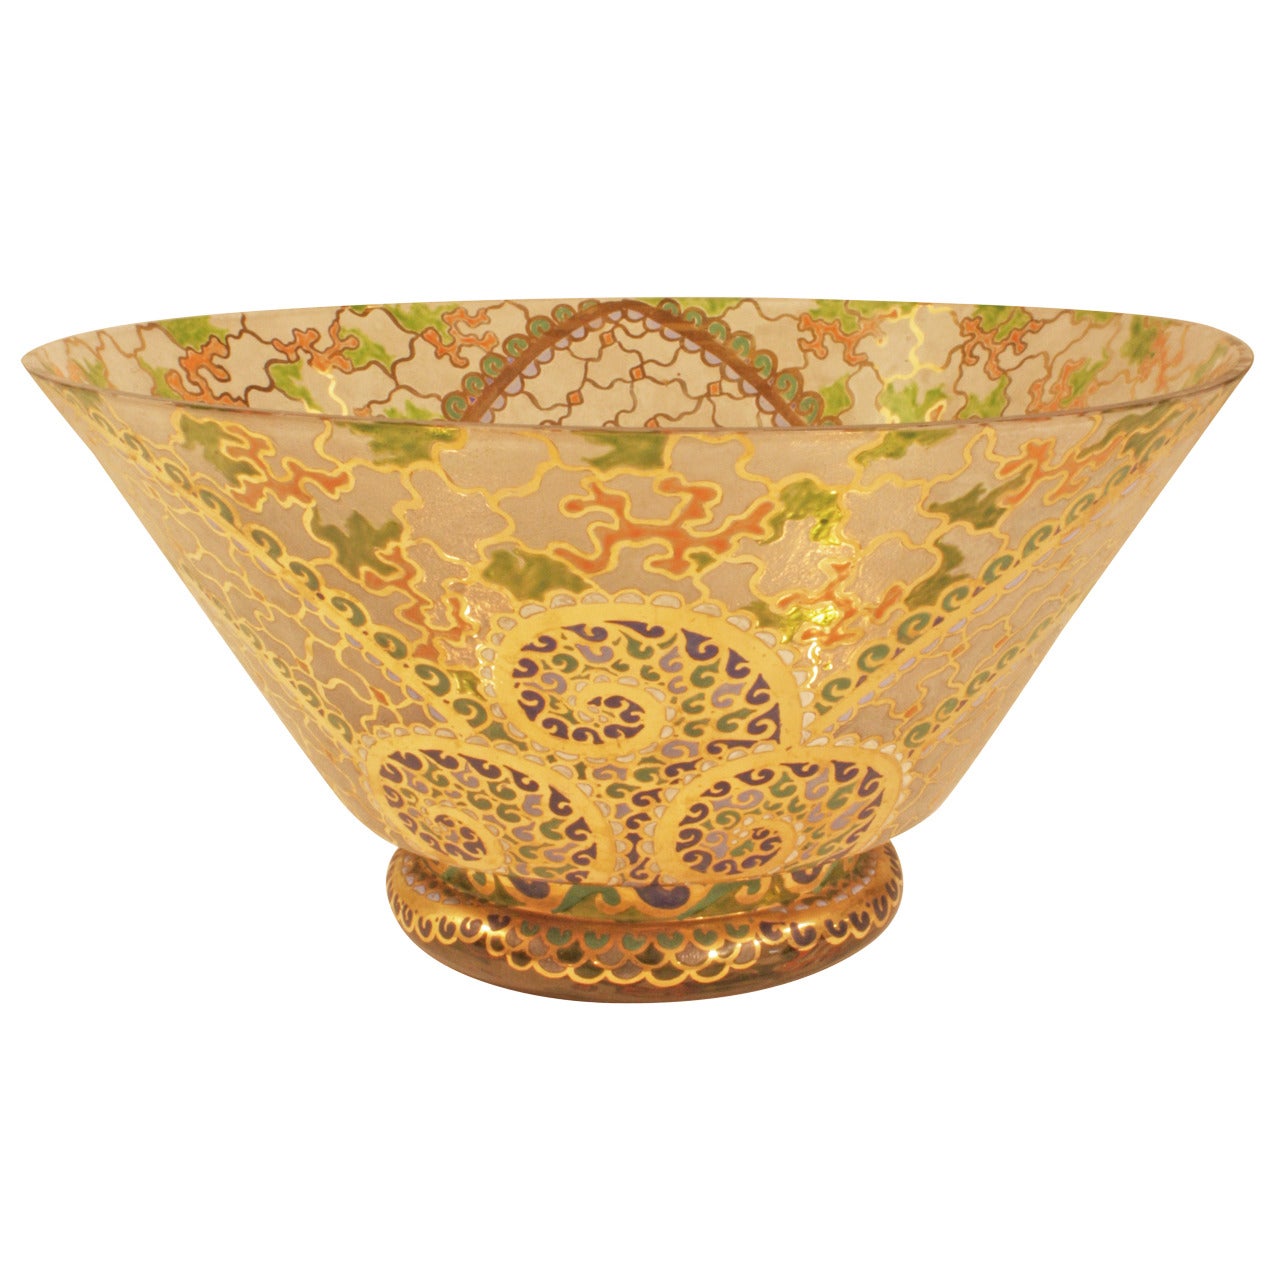 Art Deco Hand-Painted Glass Bowl by Riera